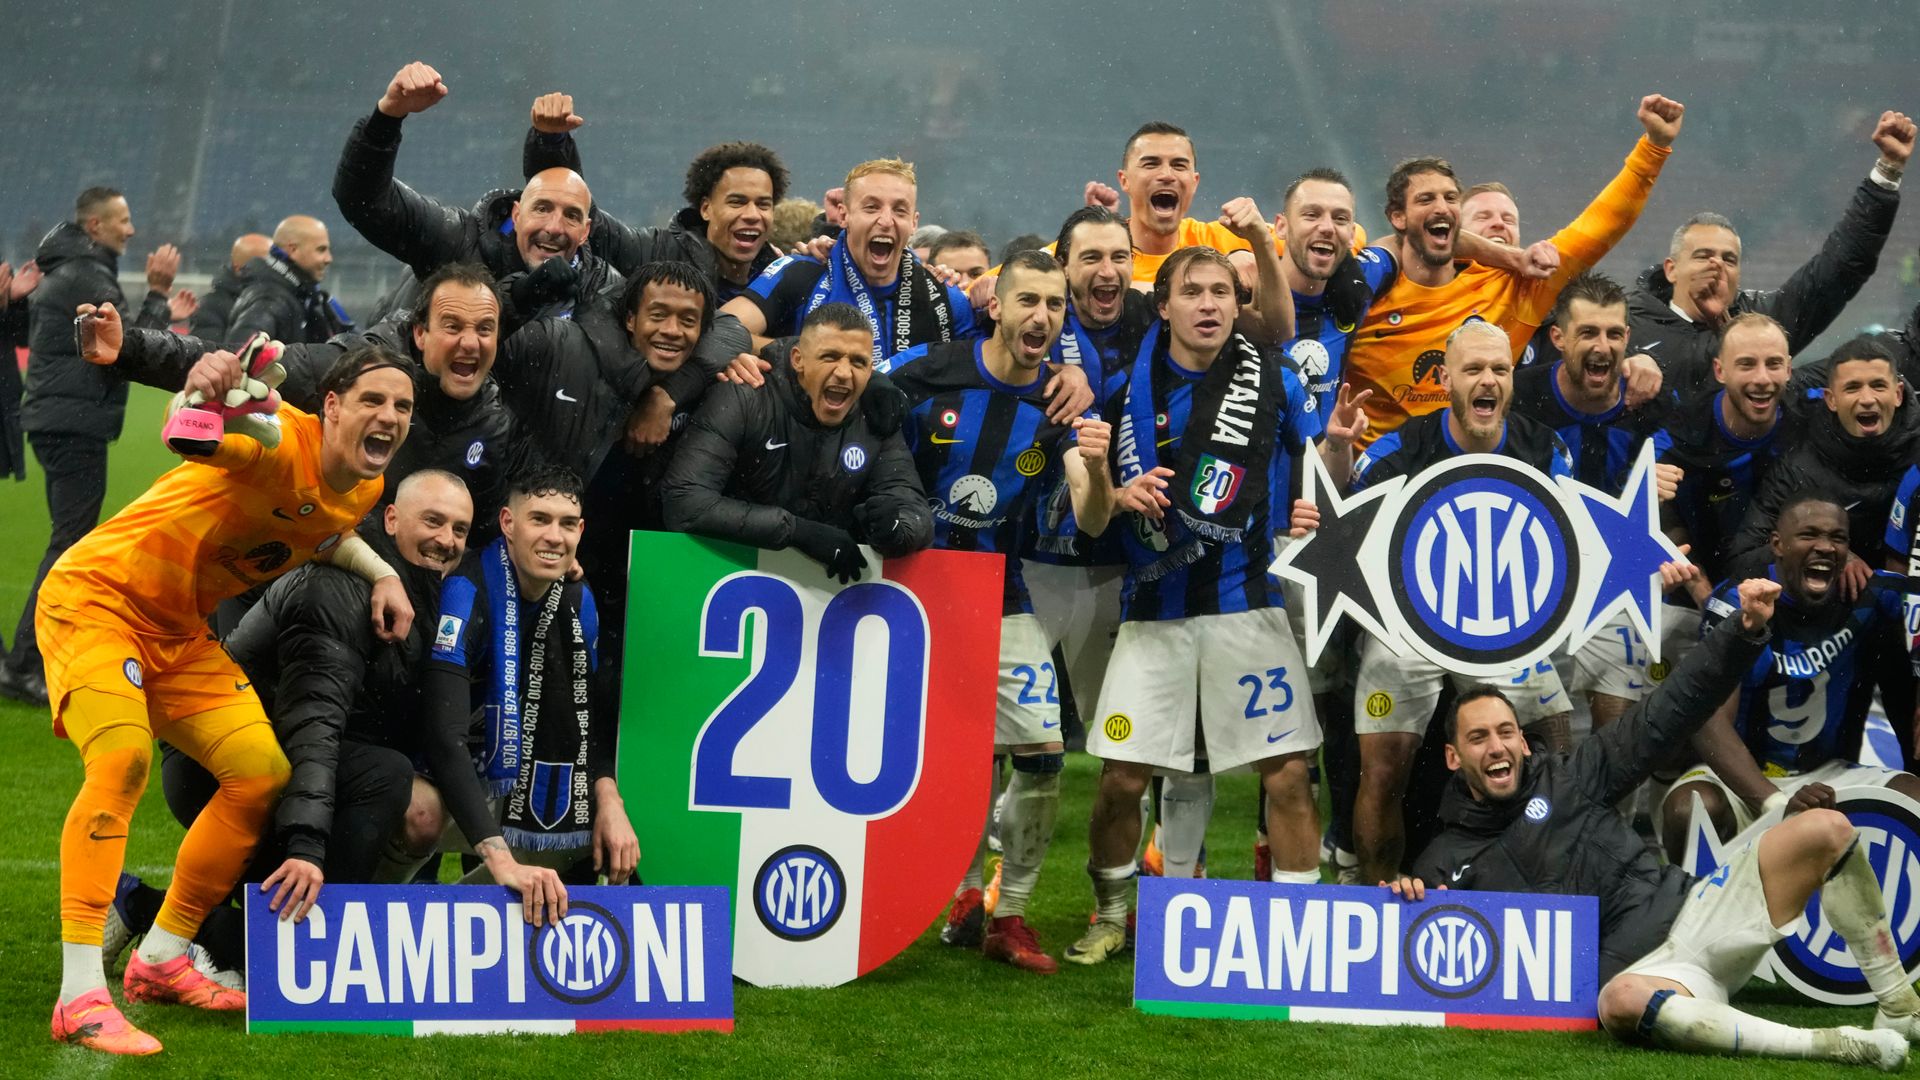 Inter Milan clinch Serie A title with victory over rivals AC Milan